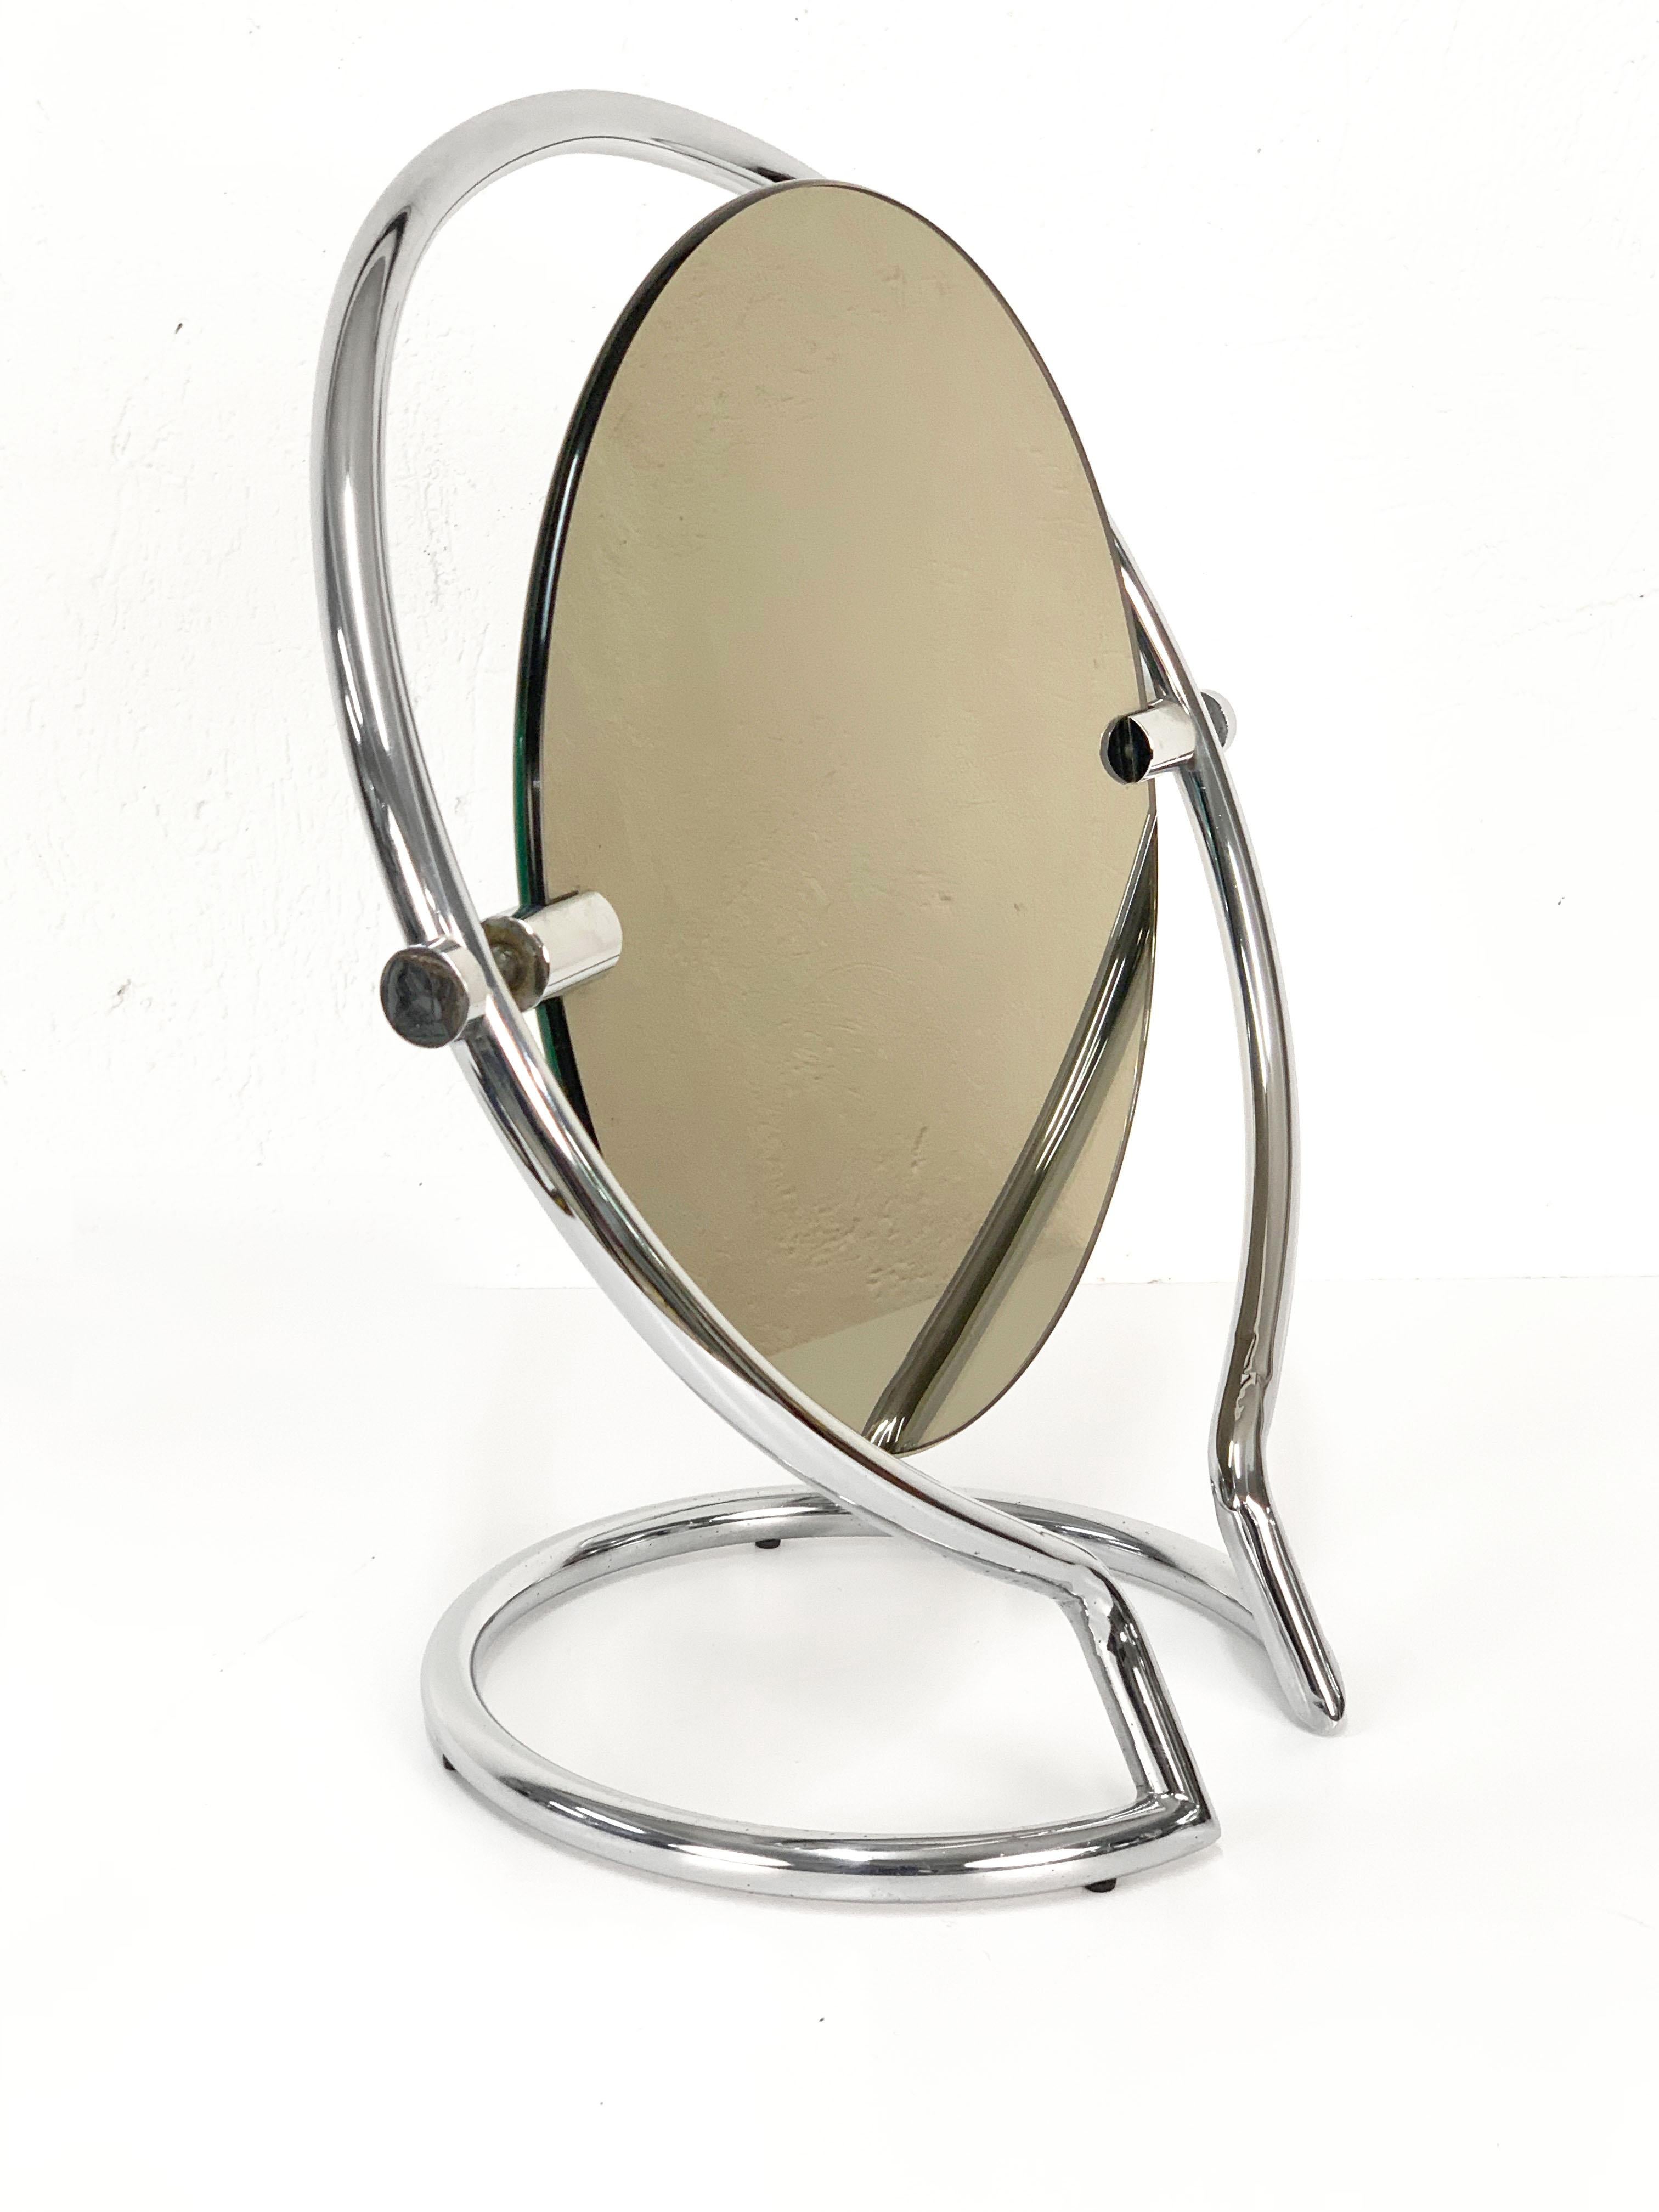 Midcentury Double Sided Italian Round Chromed Steel Dressing Mirror, 1970s For Sale 2